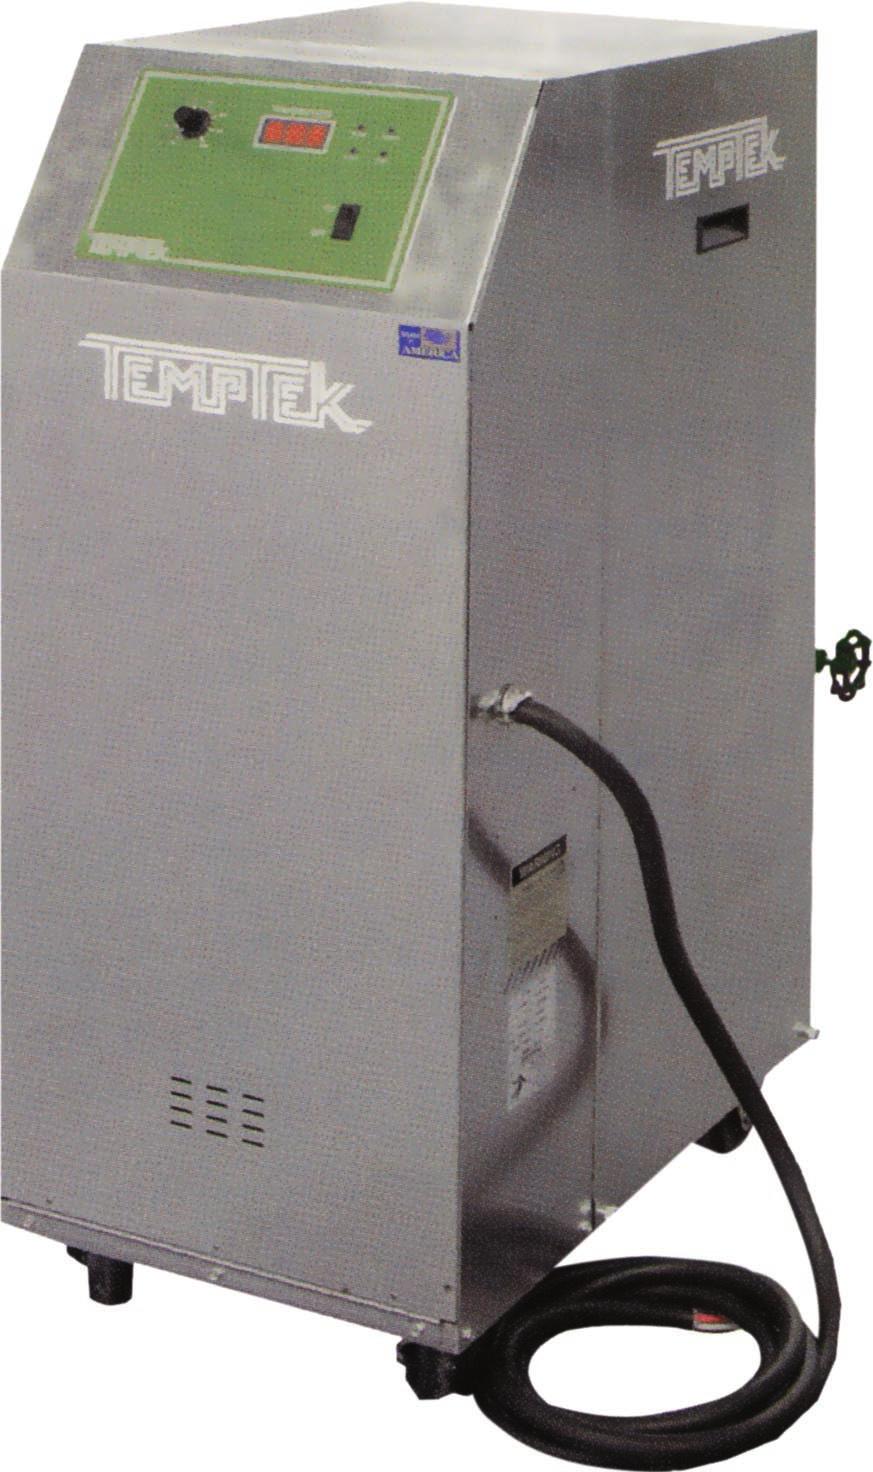 Temptek Auxiliary Equipment Mold Temperature Controllers - Water Units VT-275-LX VT Series Mold Temperature Controllers are used to process temperature control to 250 F.